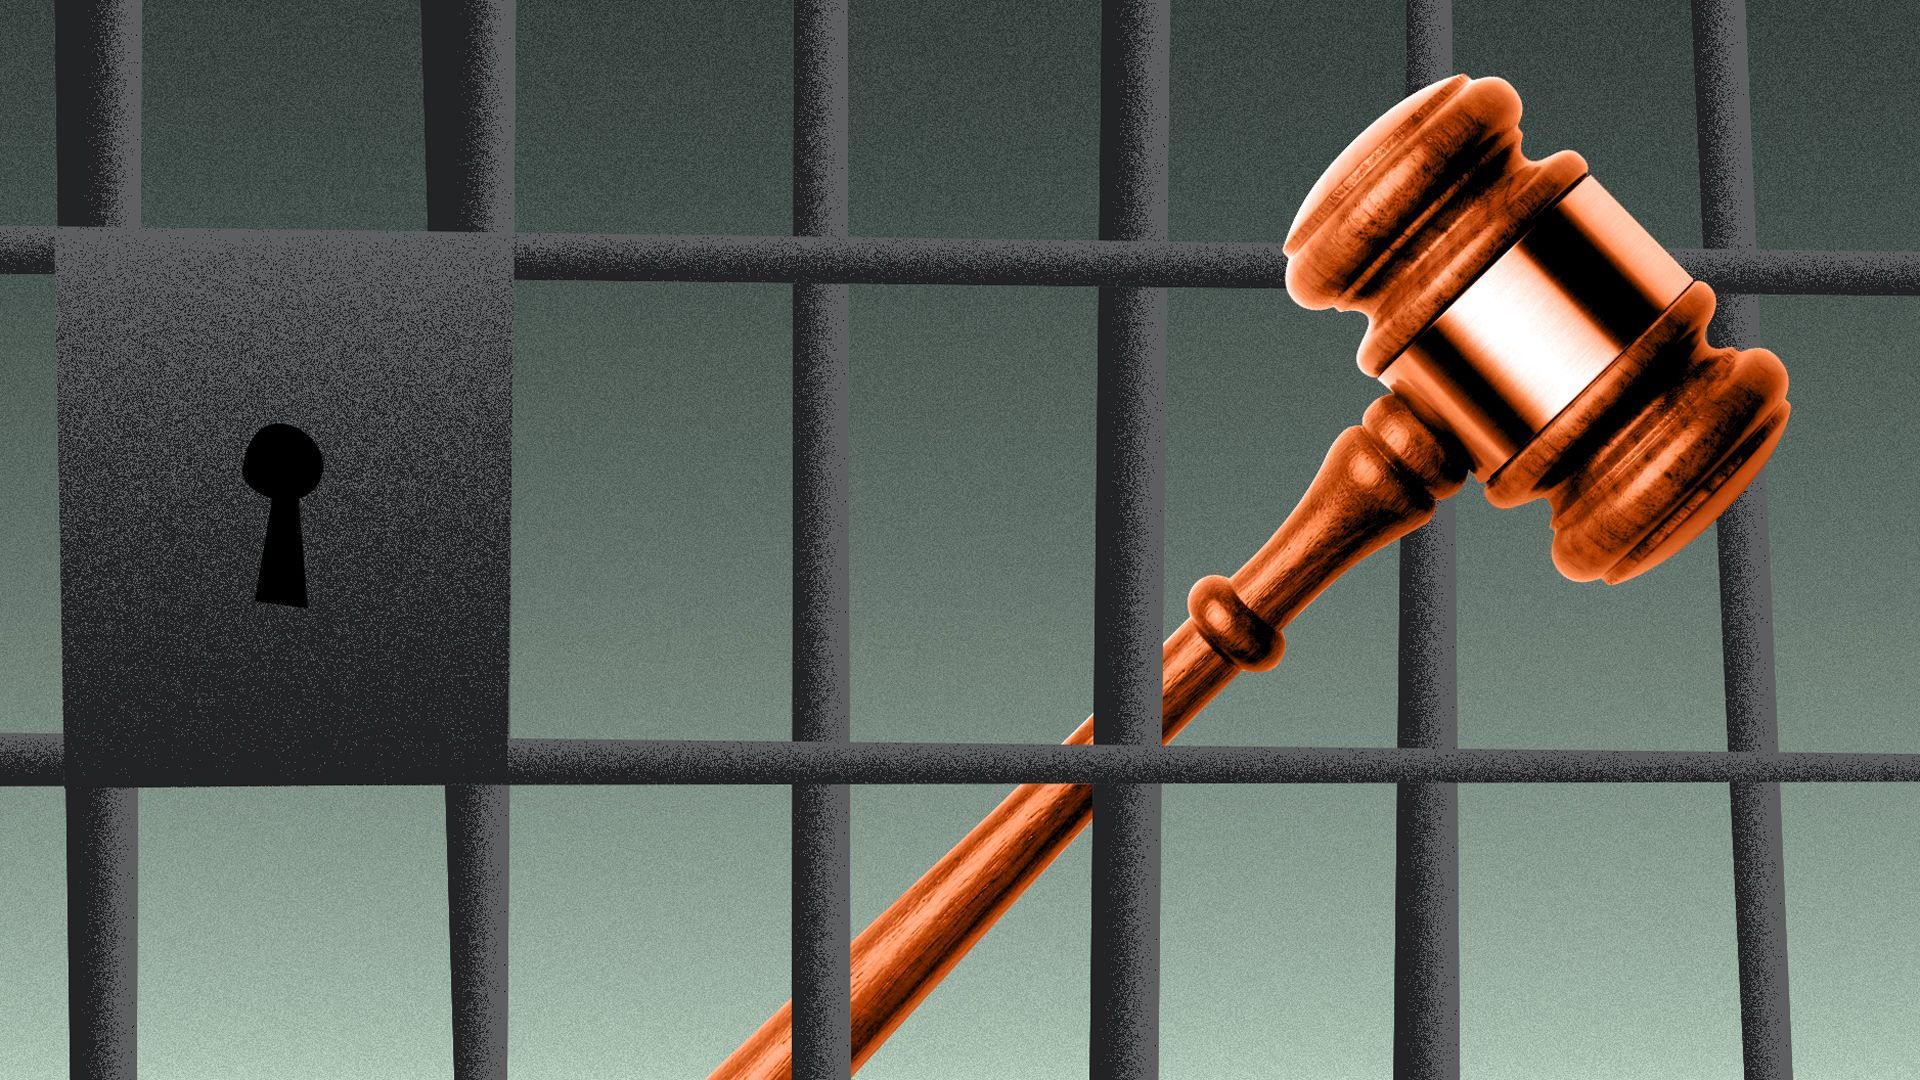 Illustration of a gavel sticking through the bars of a jail door.